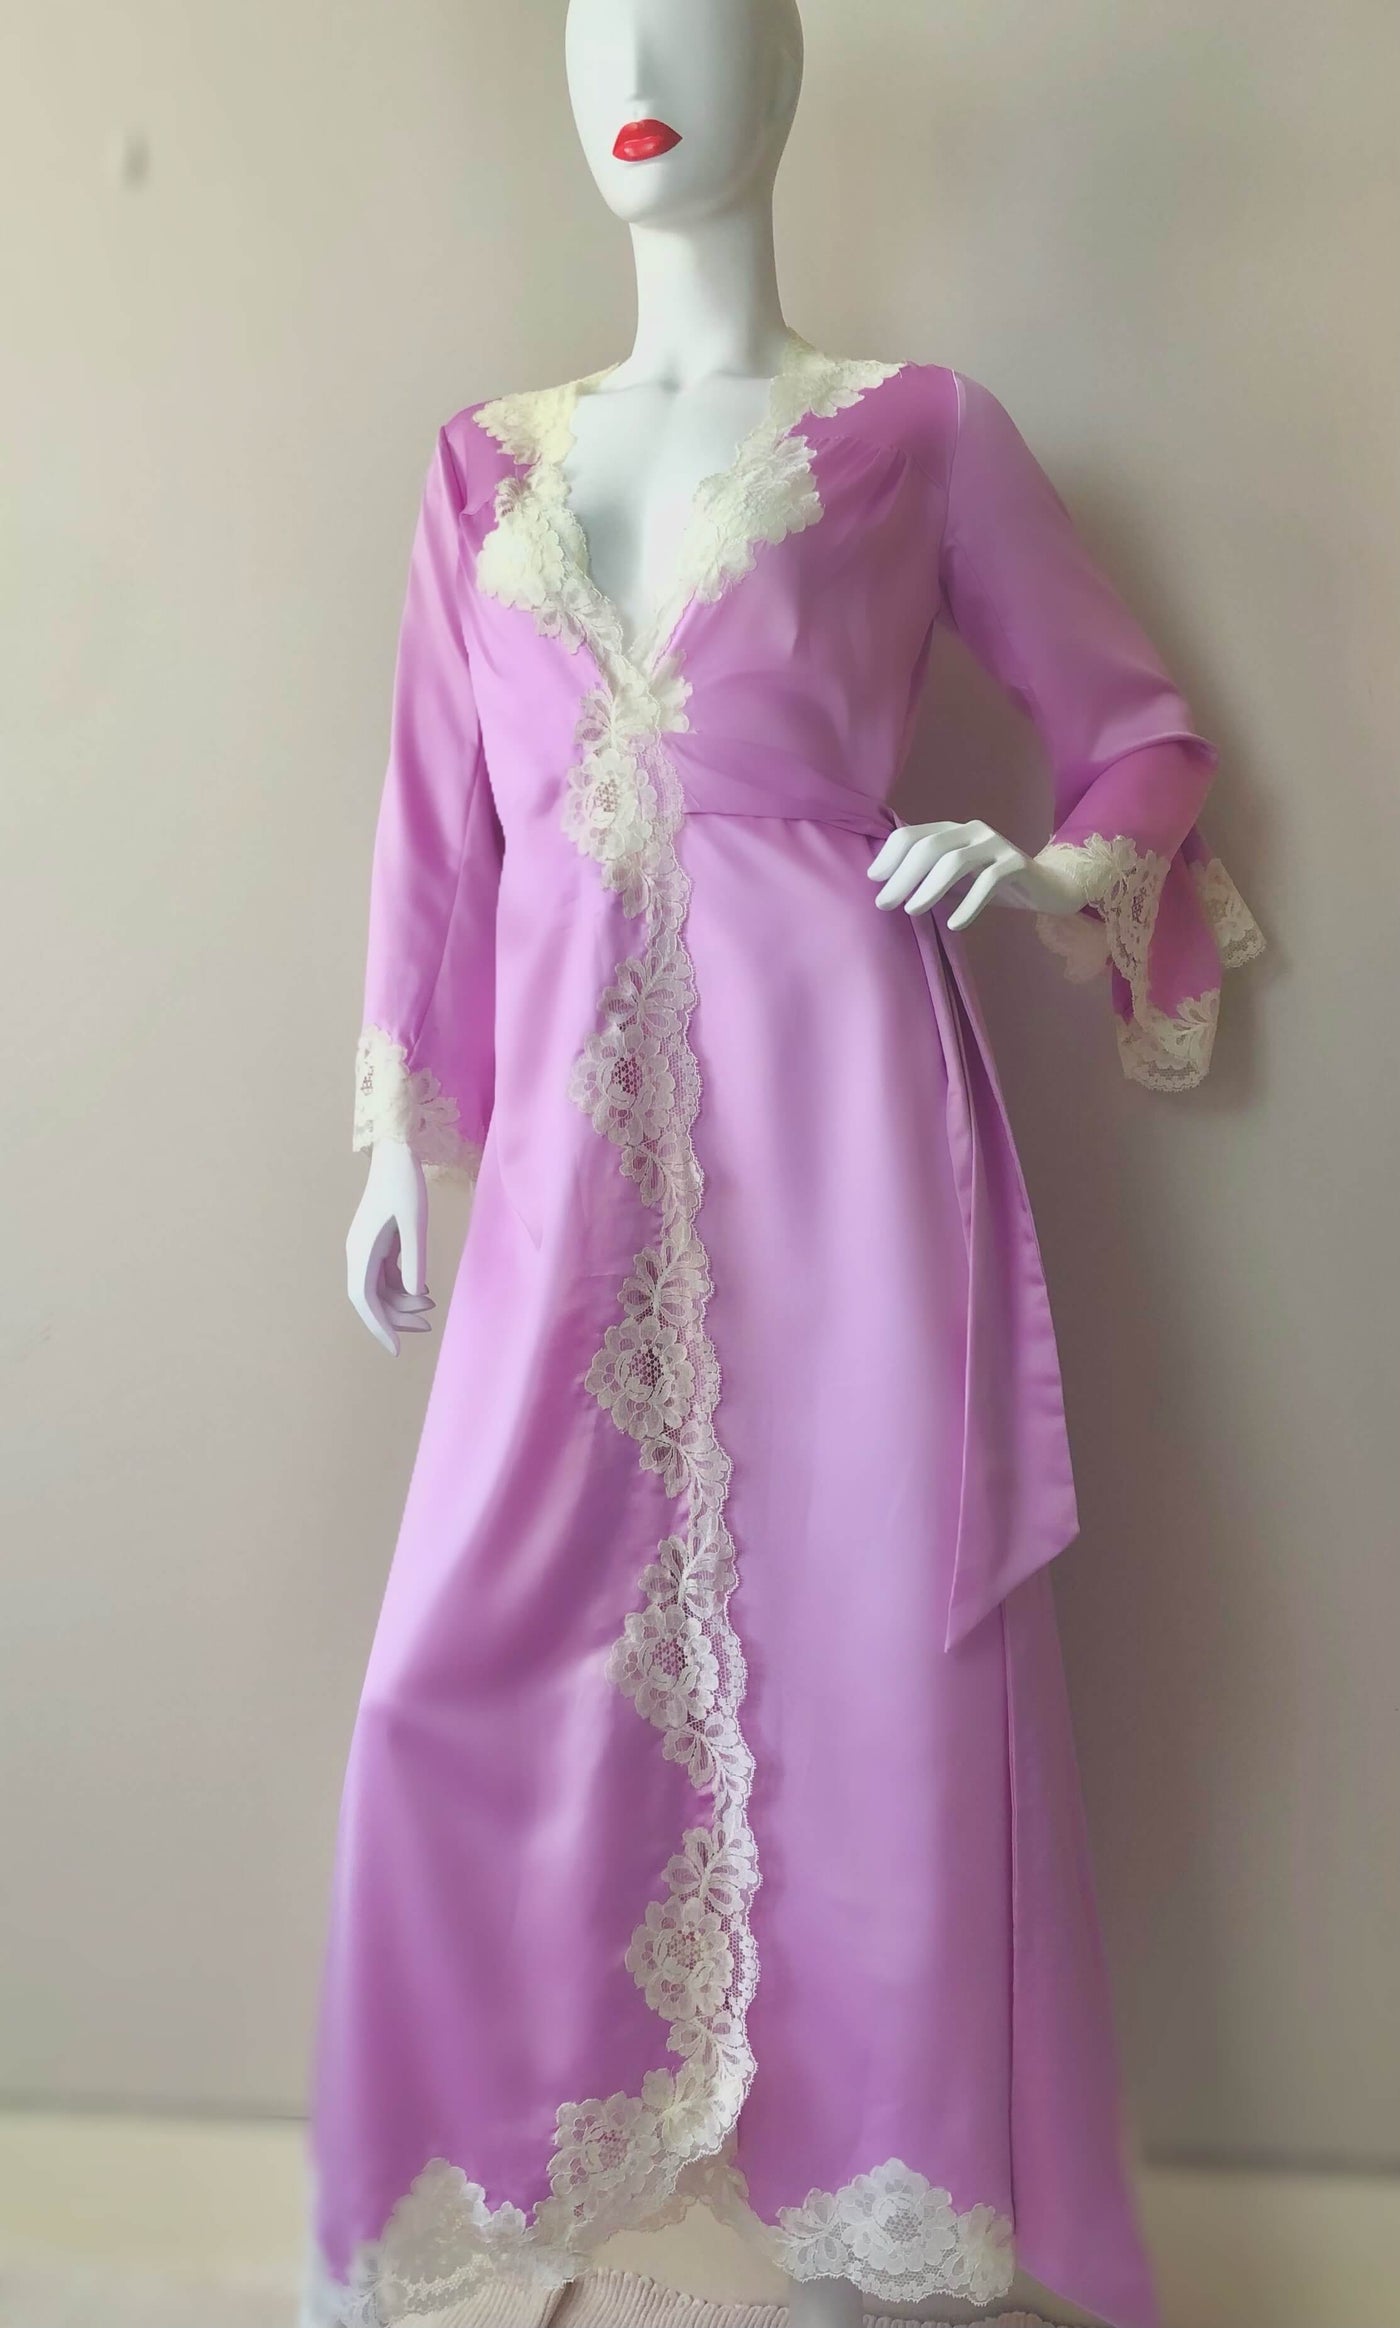 Lilac dressing gown